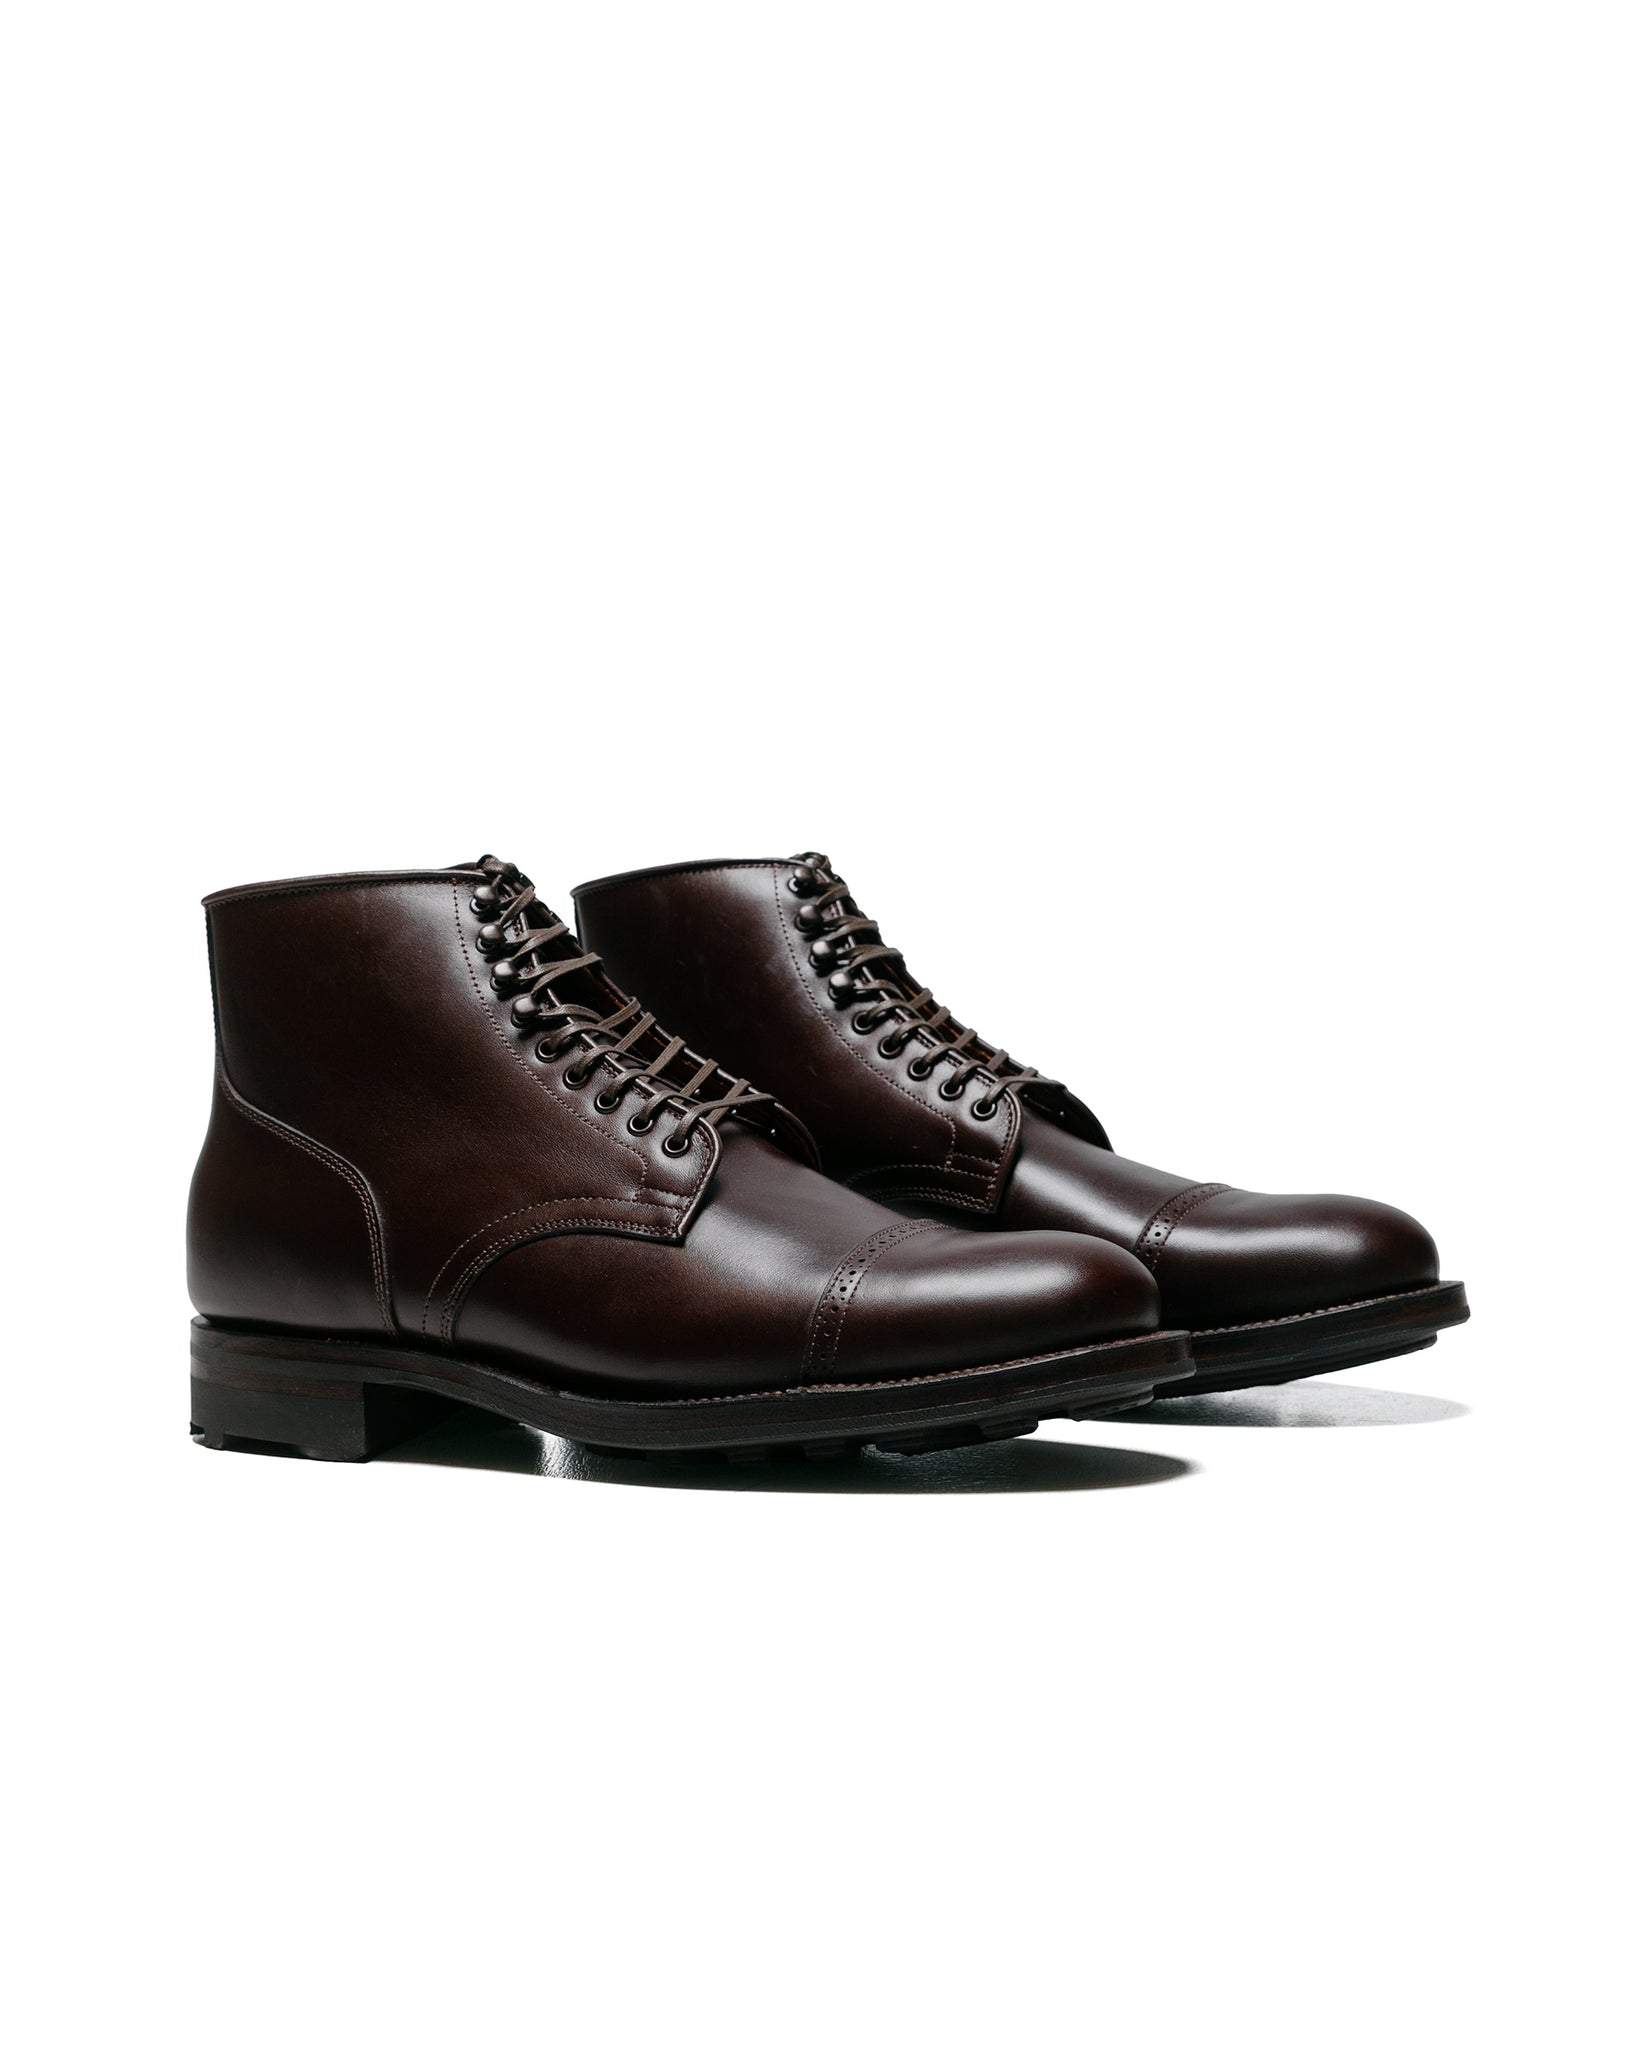 Viberg Service Boot 2030 BCT Warm Brown French Calf side